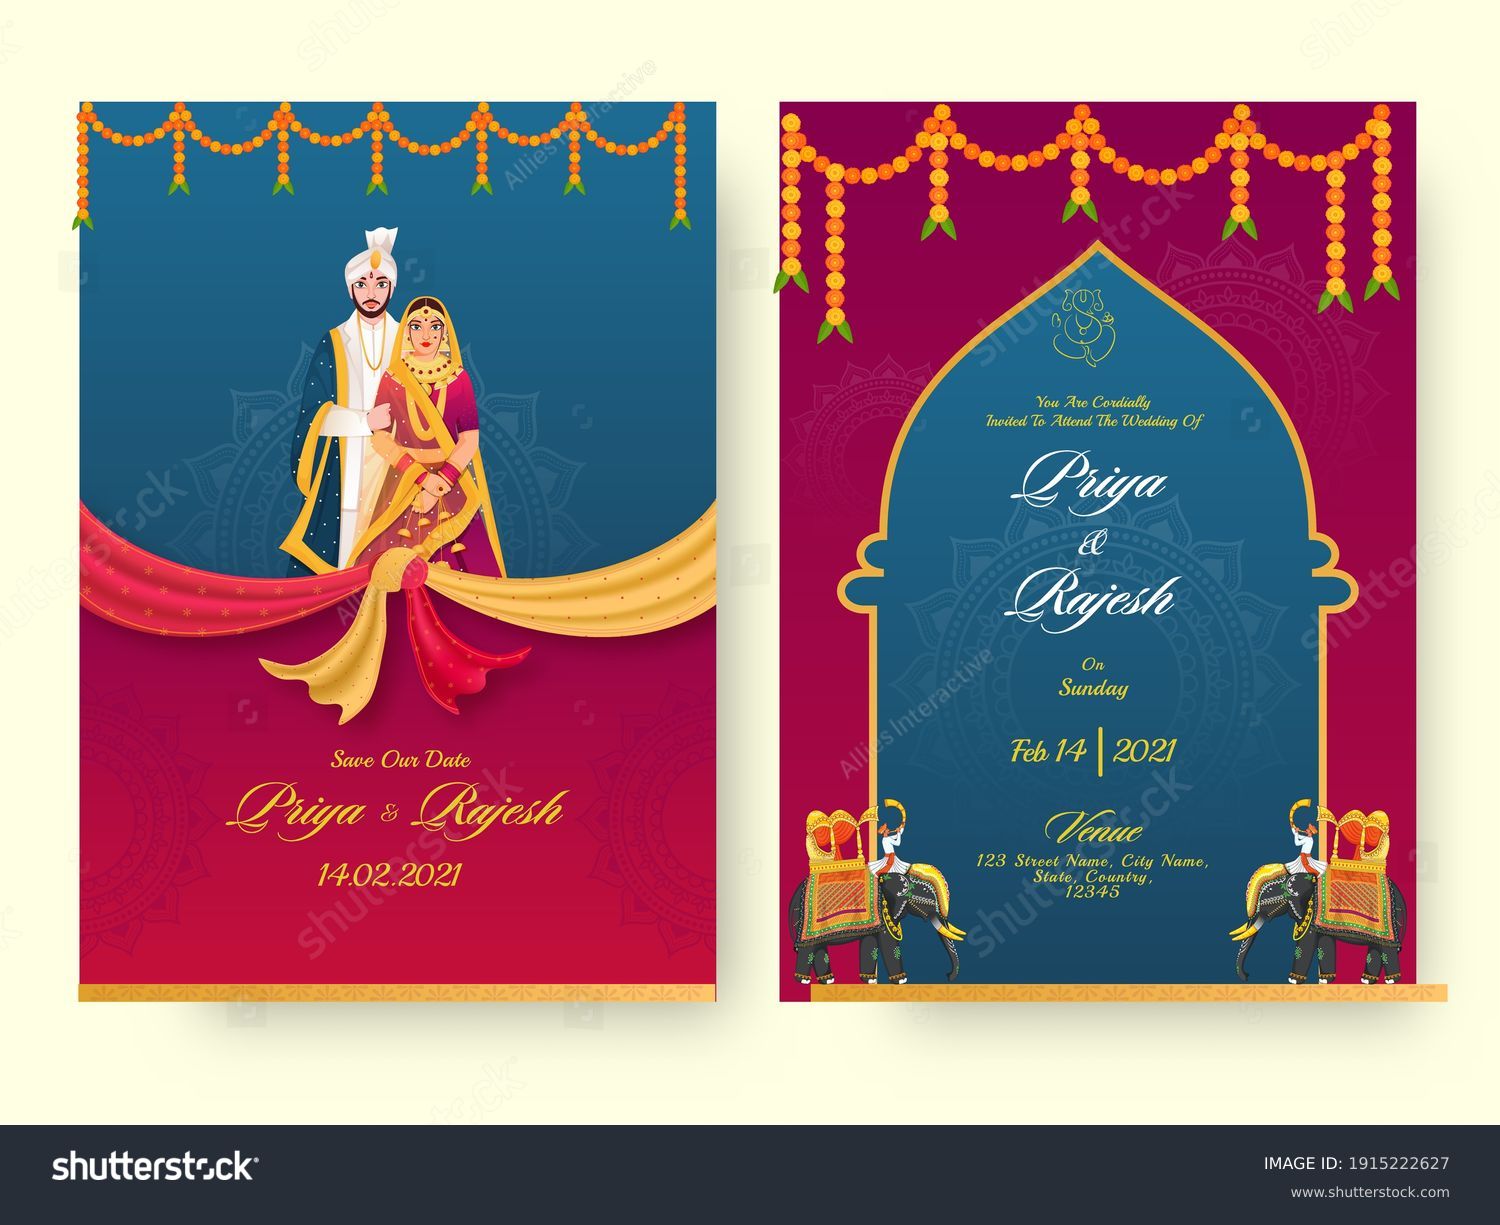 Indian Wedding Invitation Card Template Layout With Hindu Couple And Event Details. #1915222627